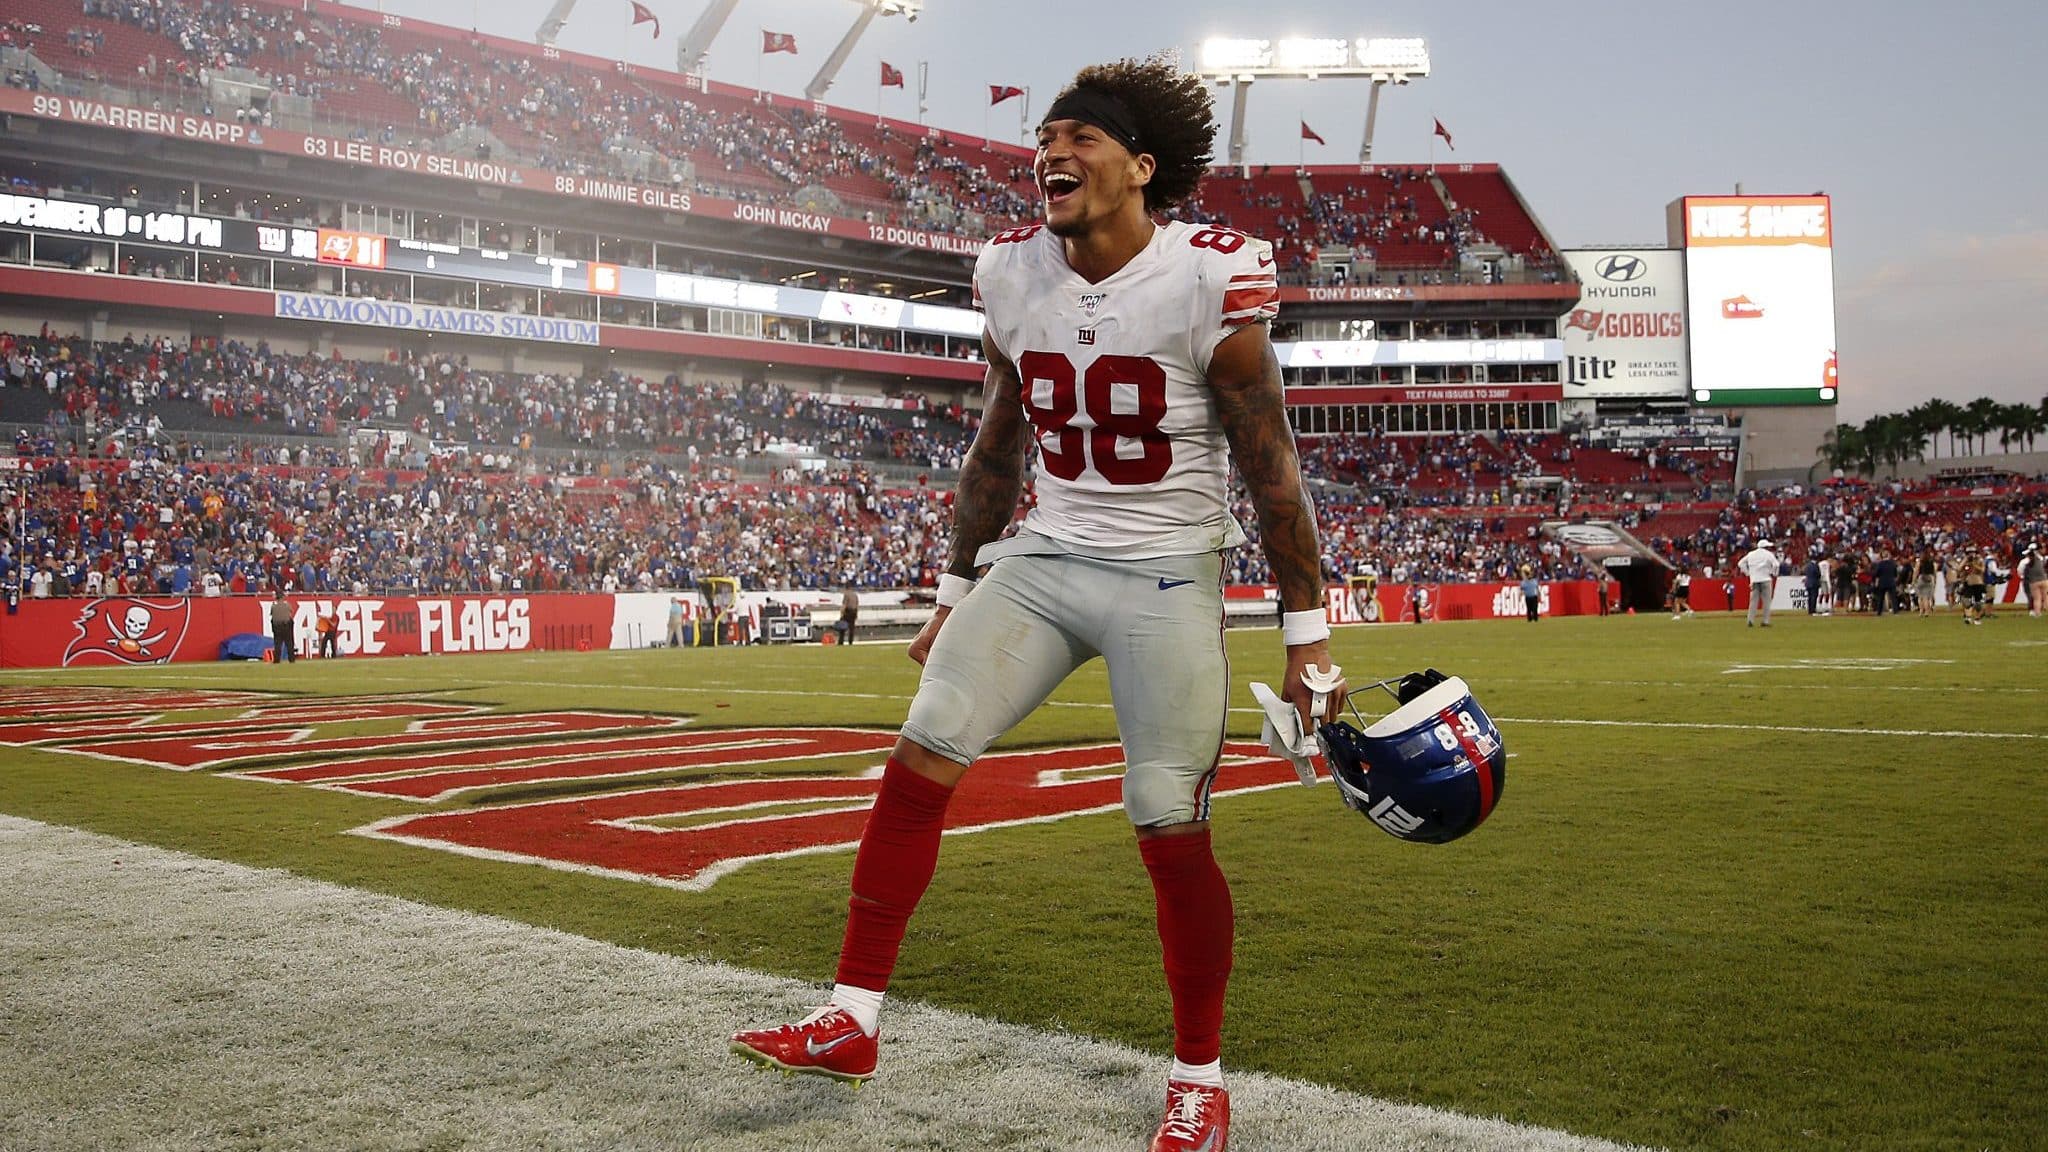 TAMPA, FLORIDA - SEPTEMBER 22: Evan Engram #88 of the New York Giants celebrates after defeating the Tampa Bay Buccaneers 32-31 at Raymond James Stadium on September 22, 2019 in Tampa, Florida.